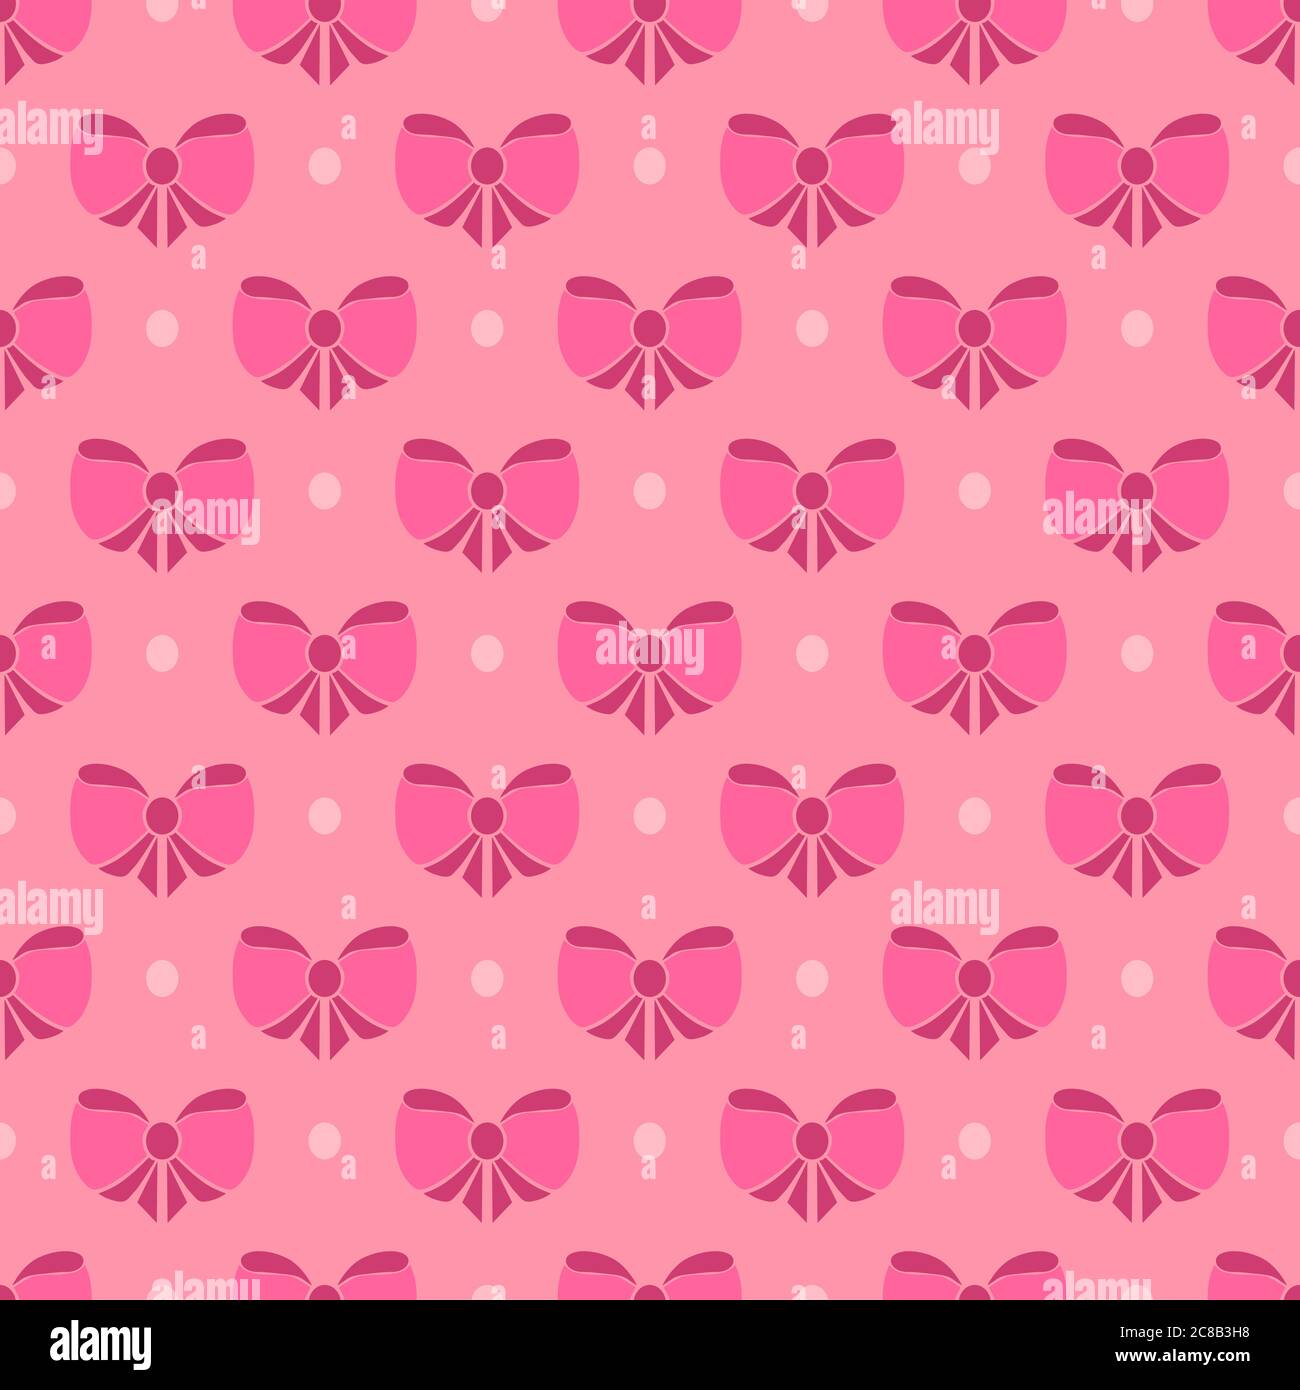 Vector seamless pattern with cute pink bows on white background